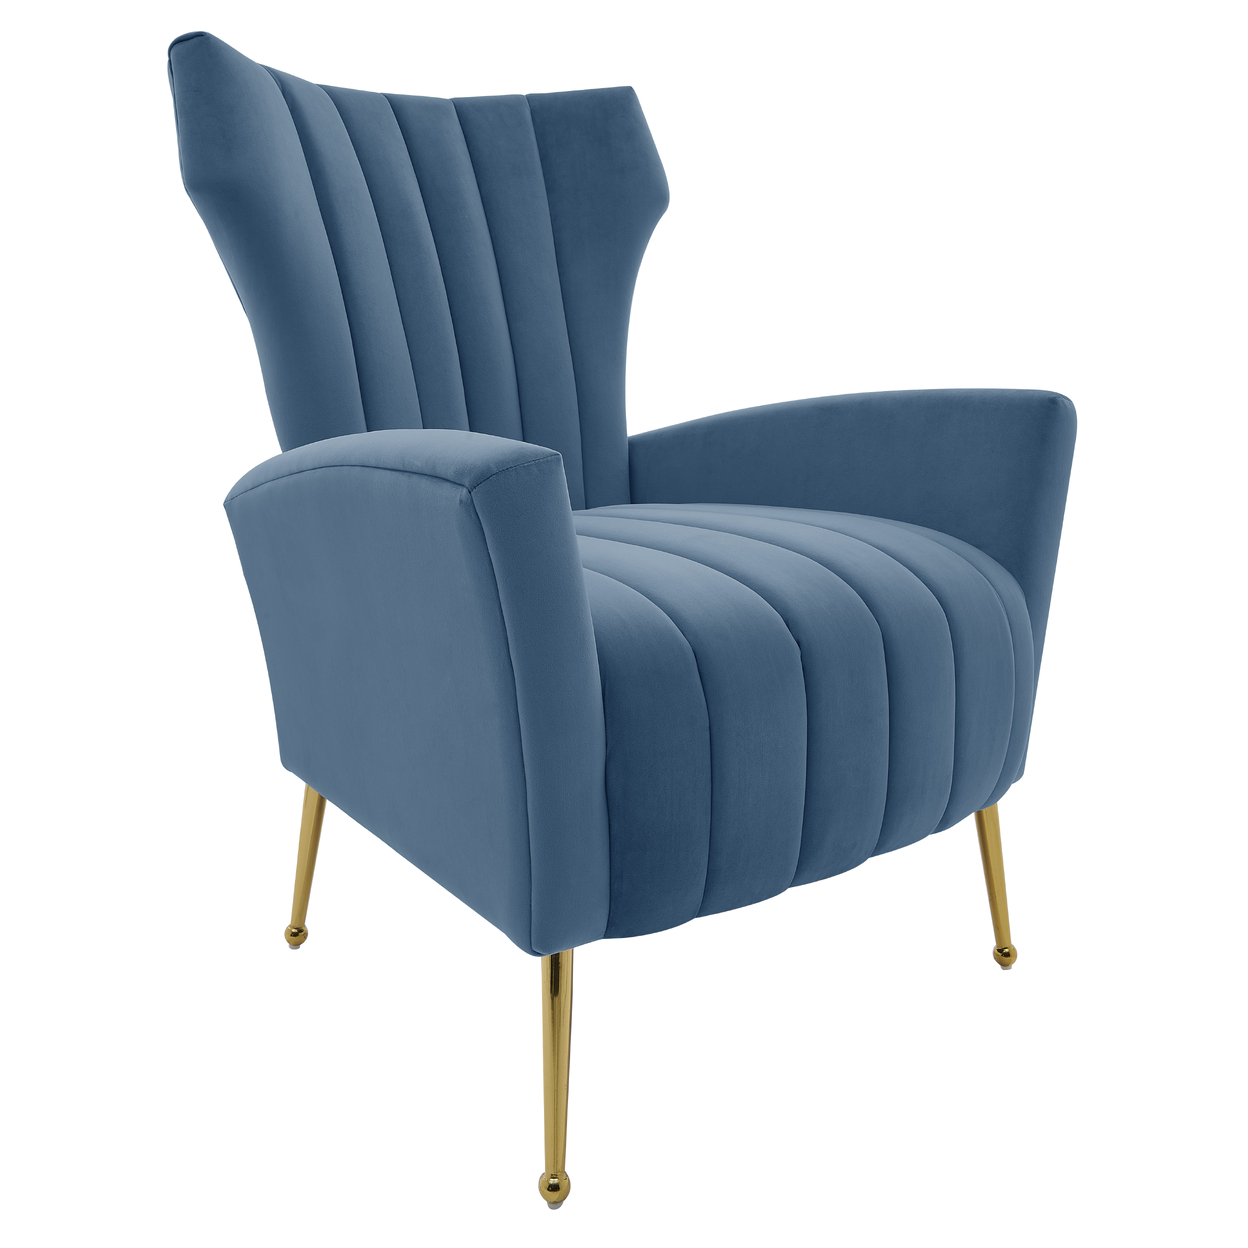 Iconic Home Kaylee Accent Chair Velvet Upholstered Vertical Channel Quilted Tall Wingback Design Goldtone Metal Legs - Teal